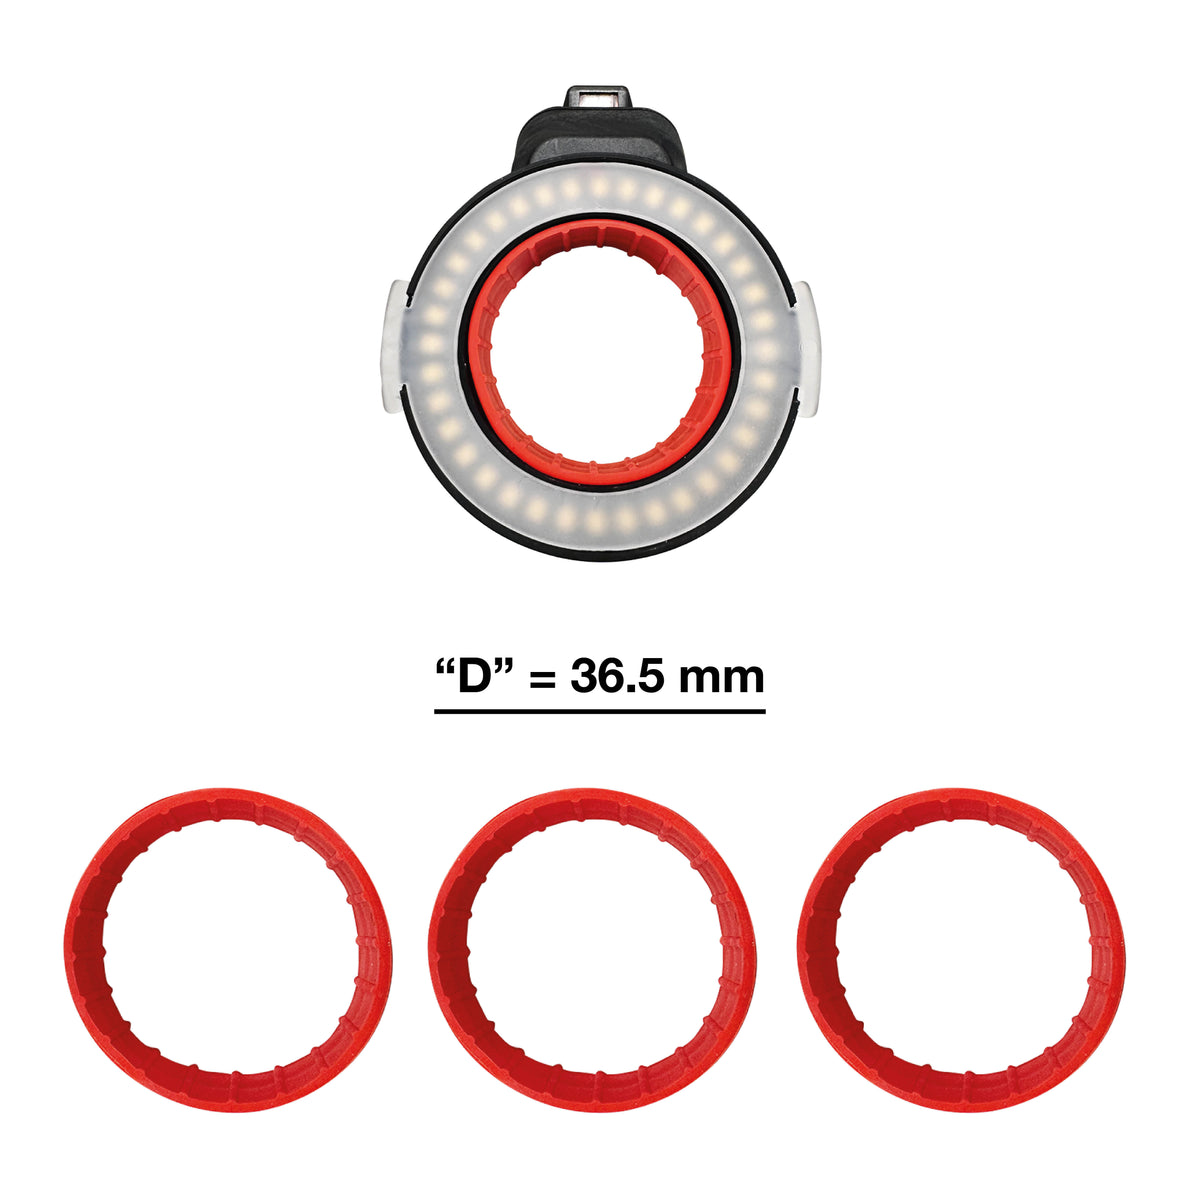 RUBBER ADAPTERS - D (3 PIECE KIT)